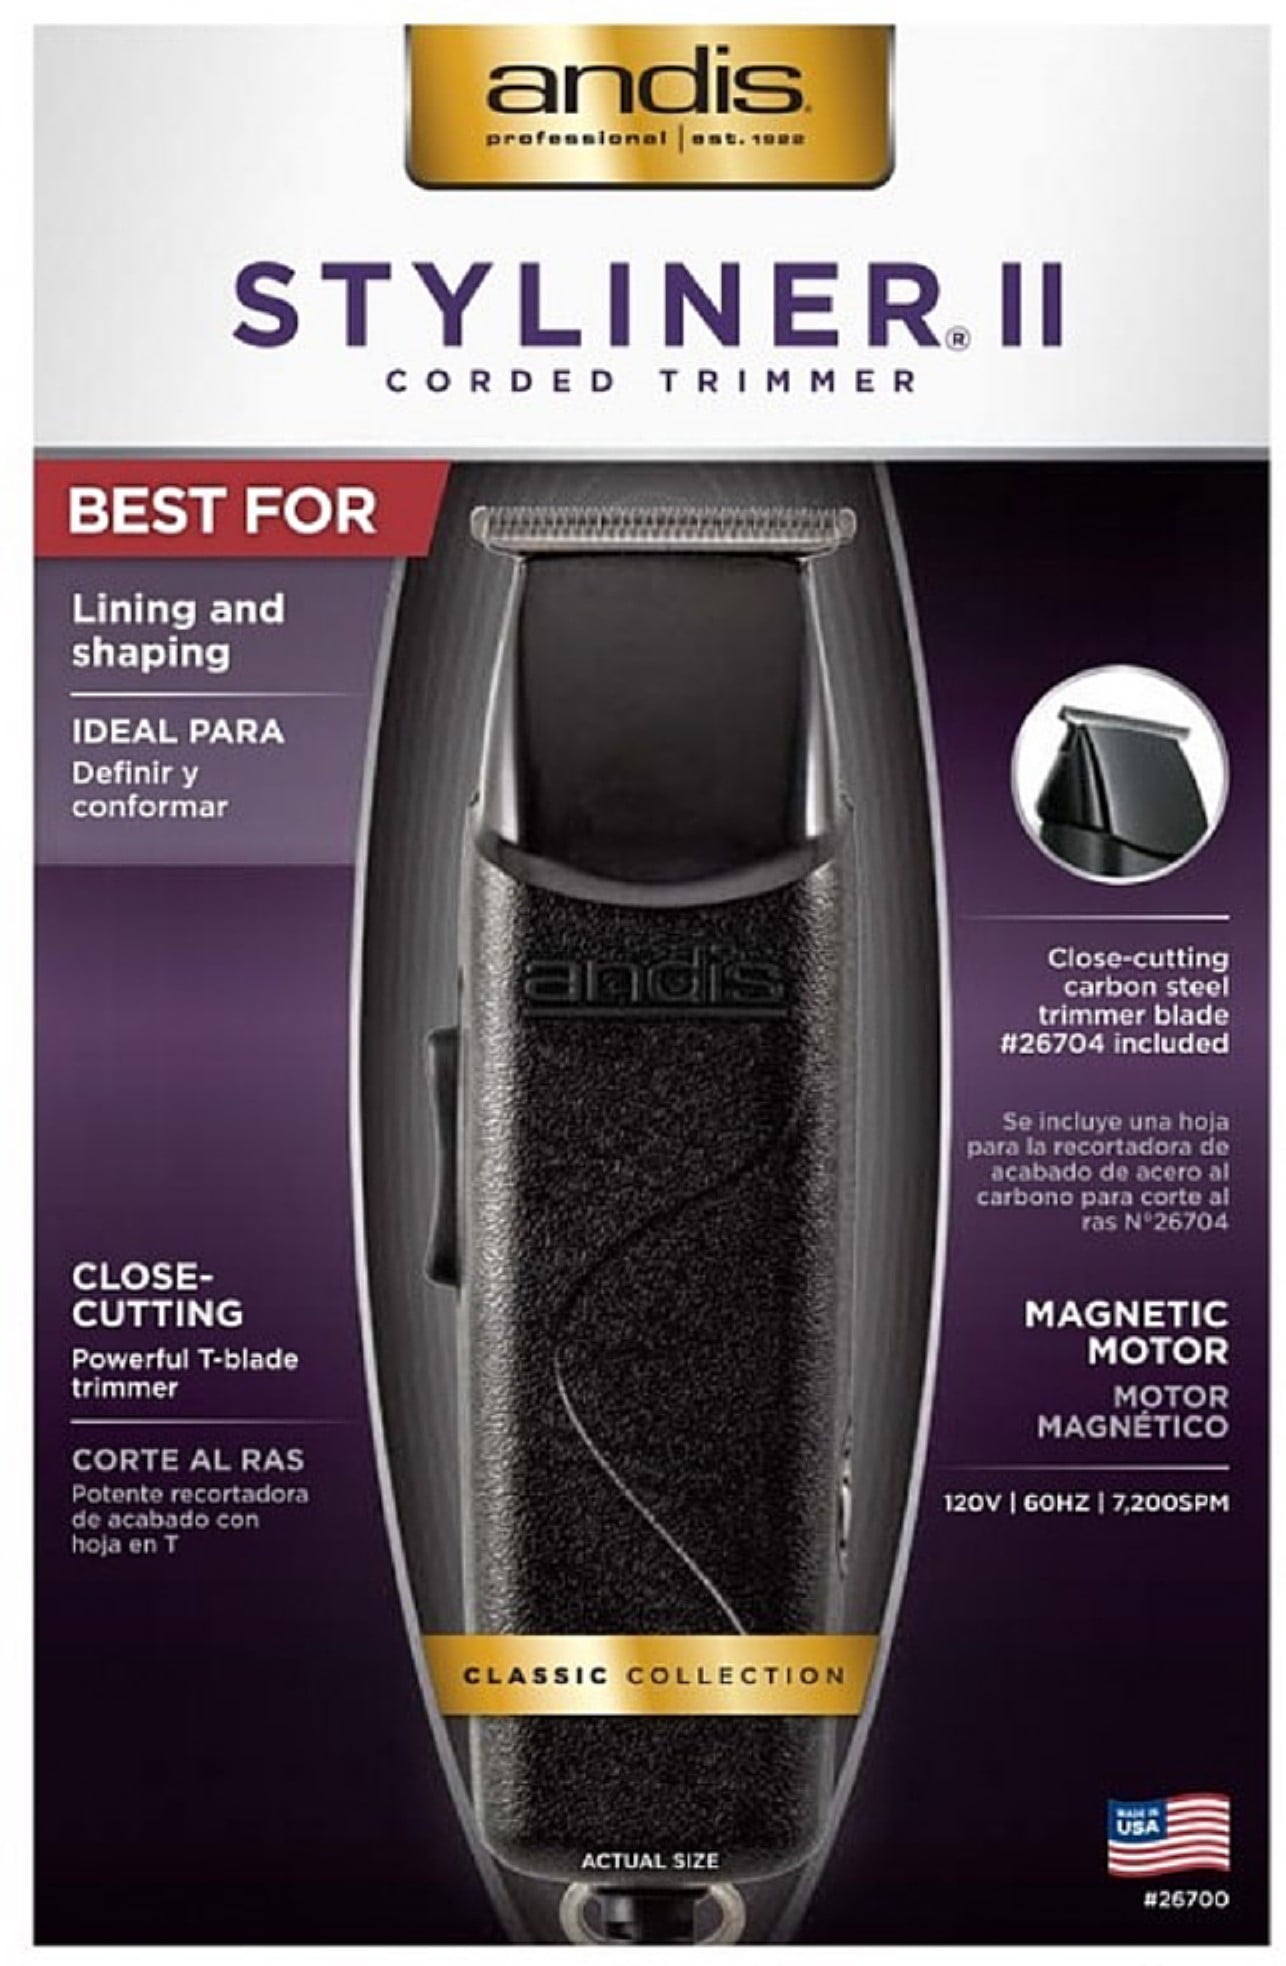 panasonic er430k ear & nose trimmer with vacuum